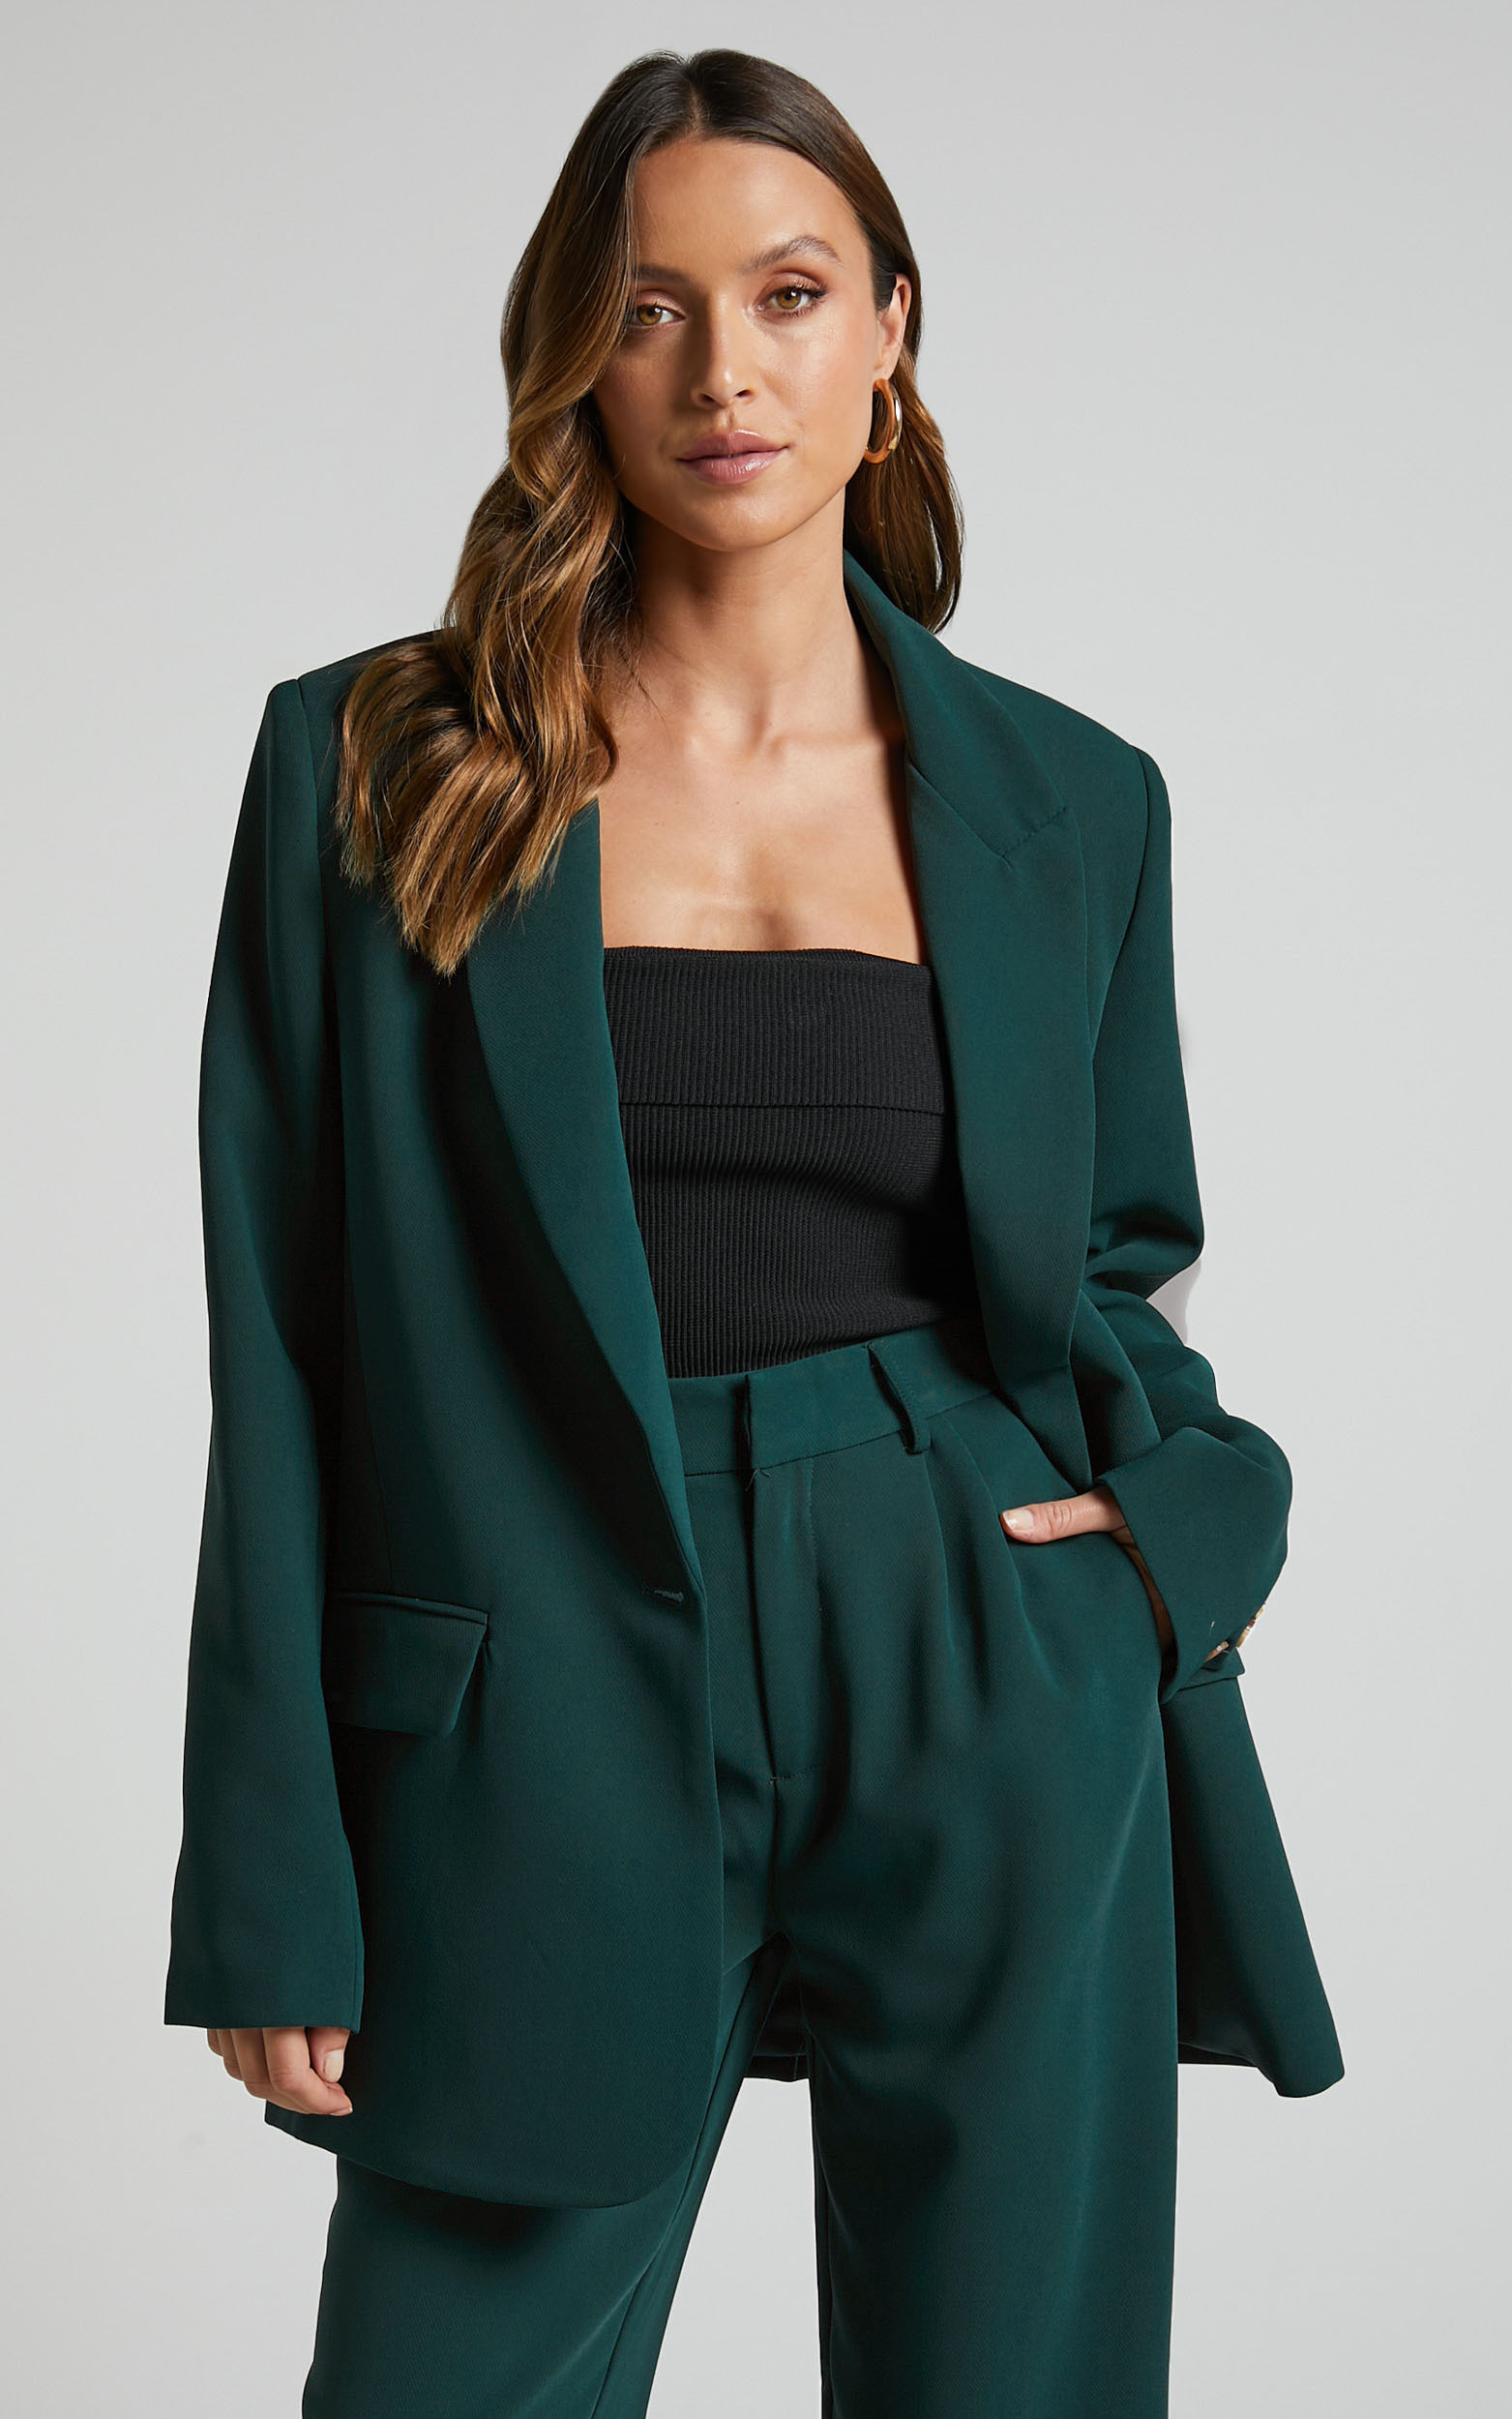 Caralina Blazer - Oversized Single Breasted Blazer in Forest Green - 06, GRN3, hi-res image number null